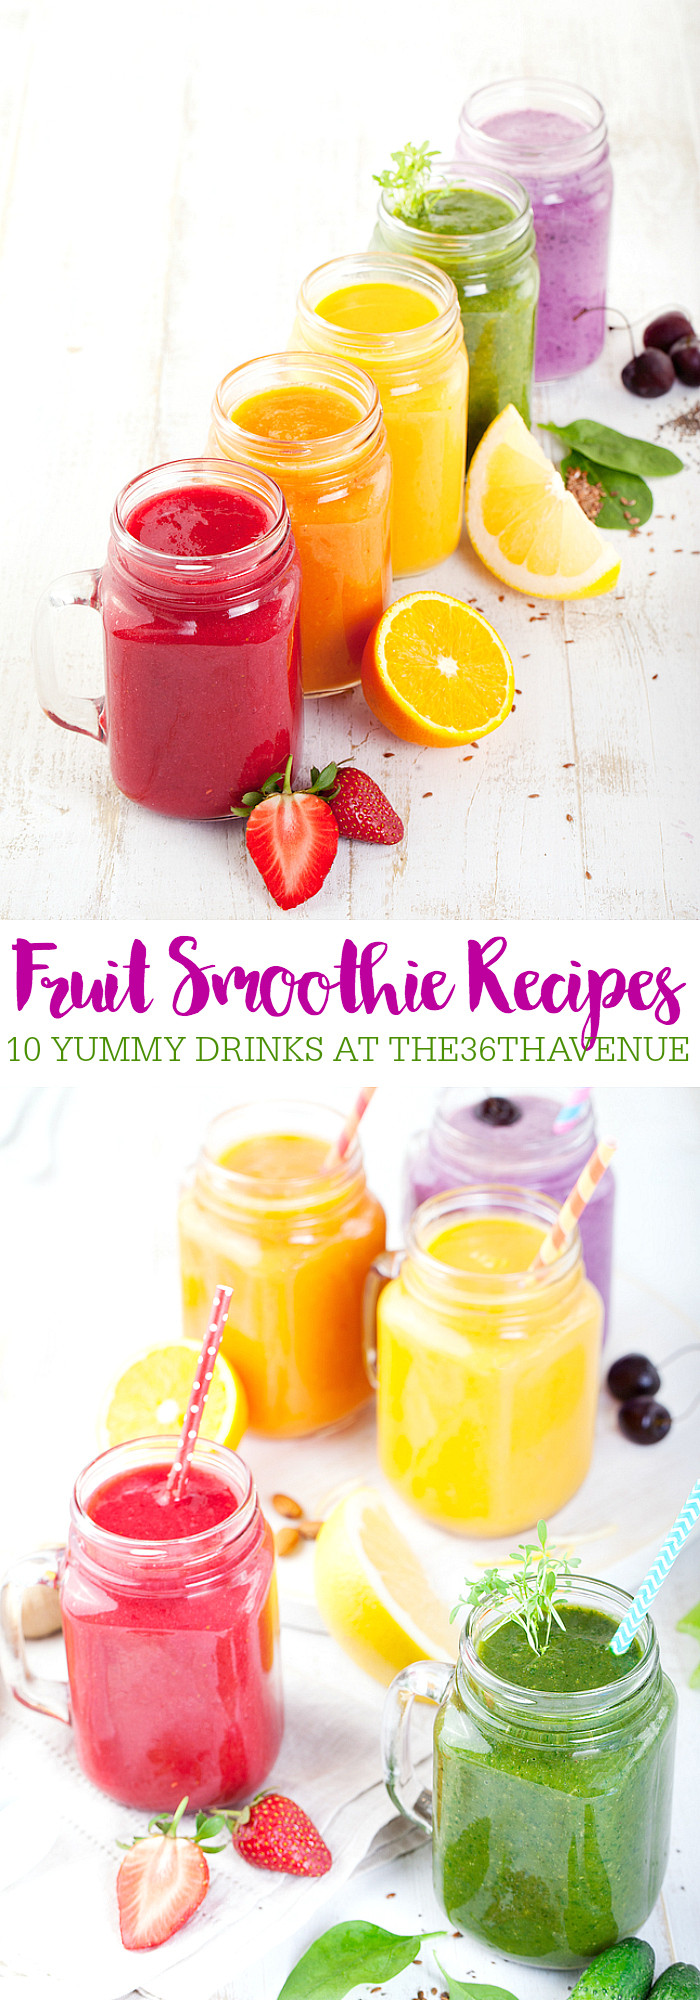 Fresh Fruits Smoothies Recipes
 Smoothie Recipes Fresh Fruit Drinks The 36th AVENUE